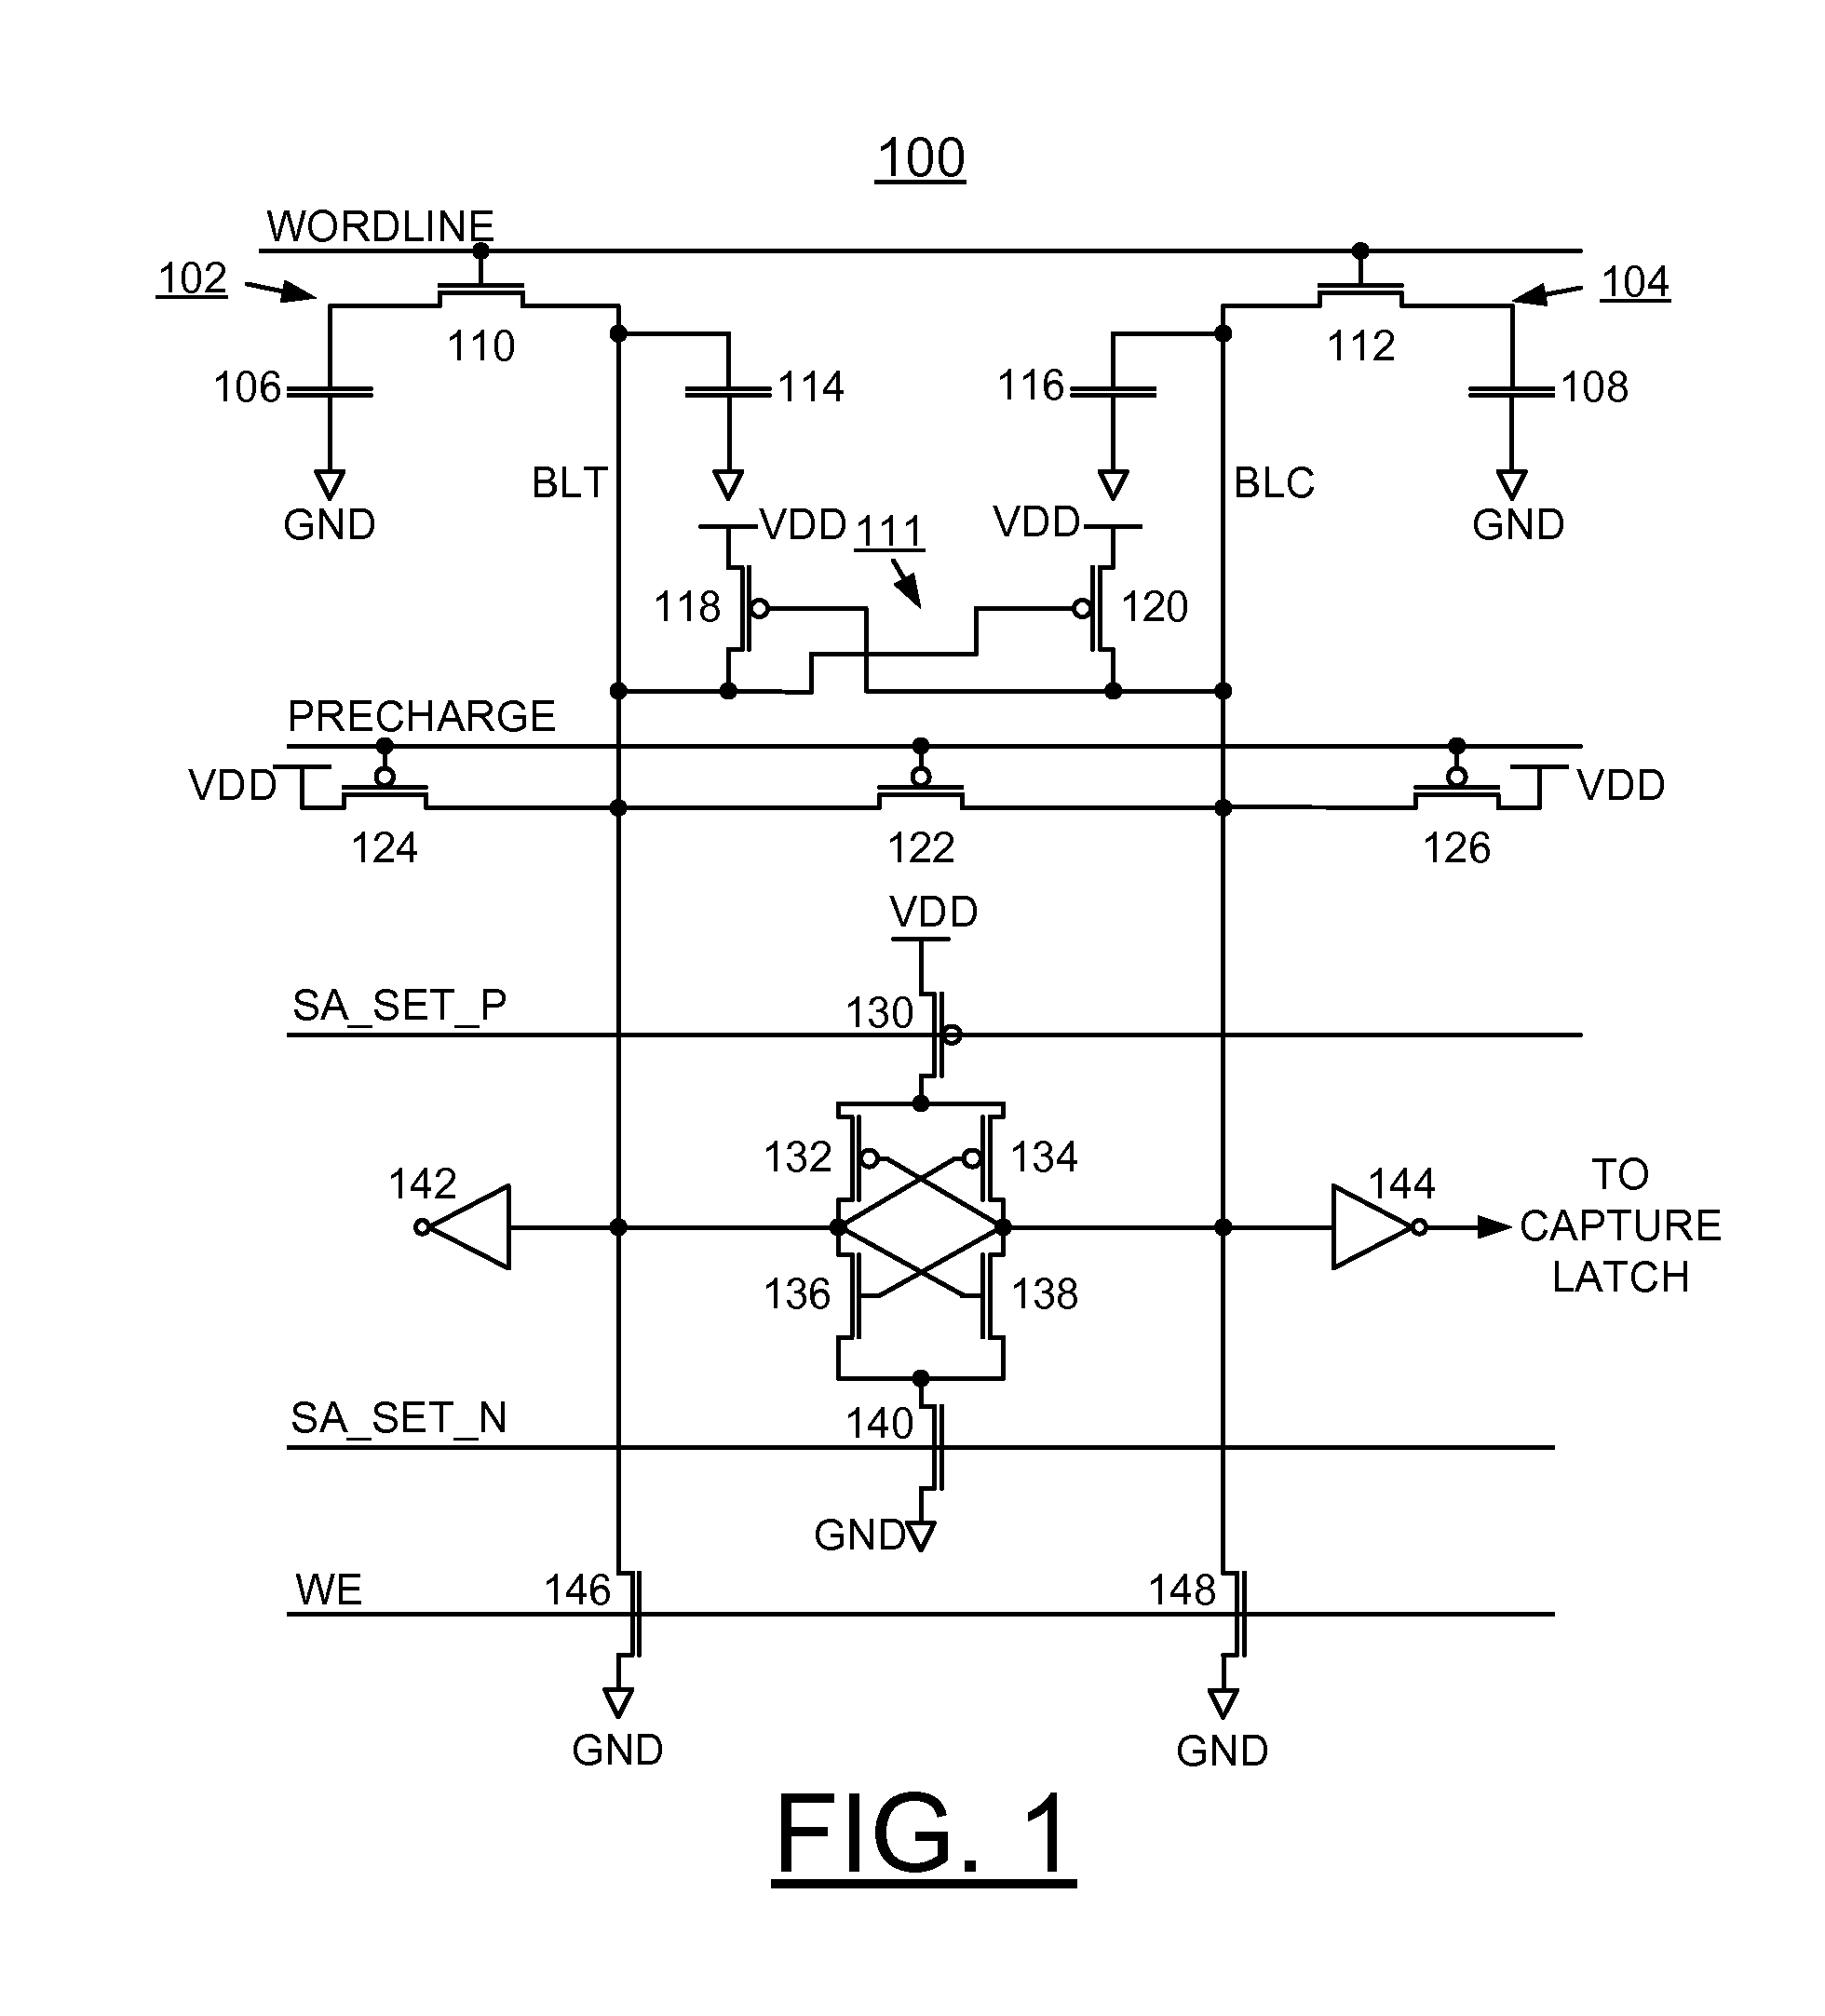 Implementing physically unclonable function (PUF) utilizing edram memory cell capacitance variation